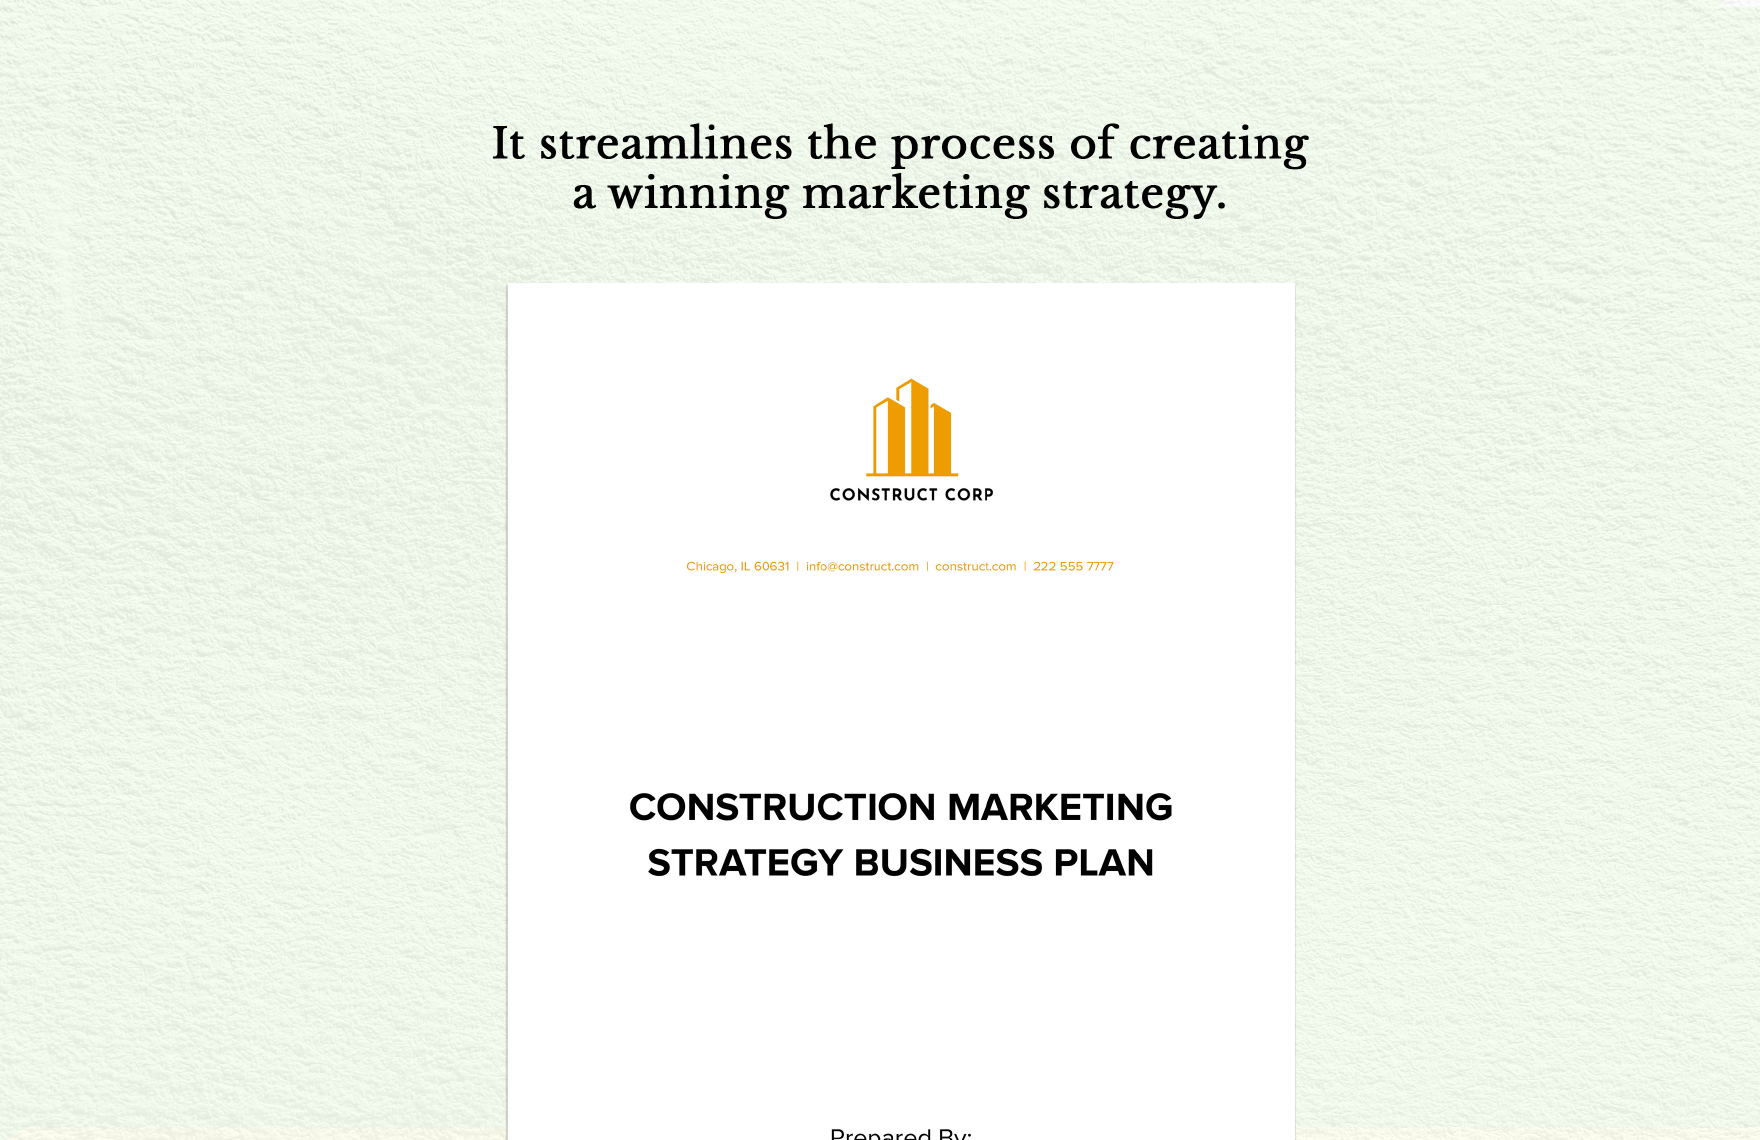 Construction Marketing Strategy Business Plan 